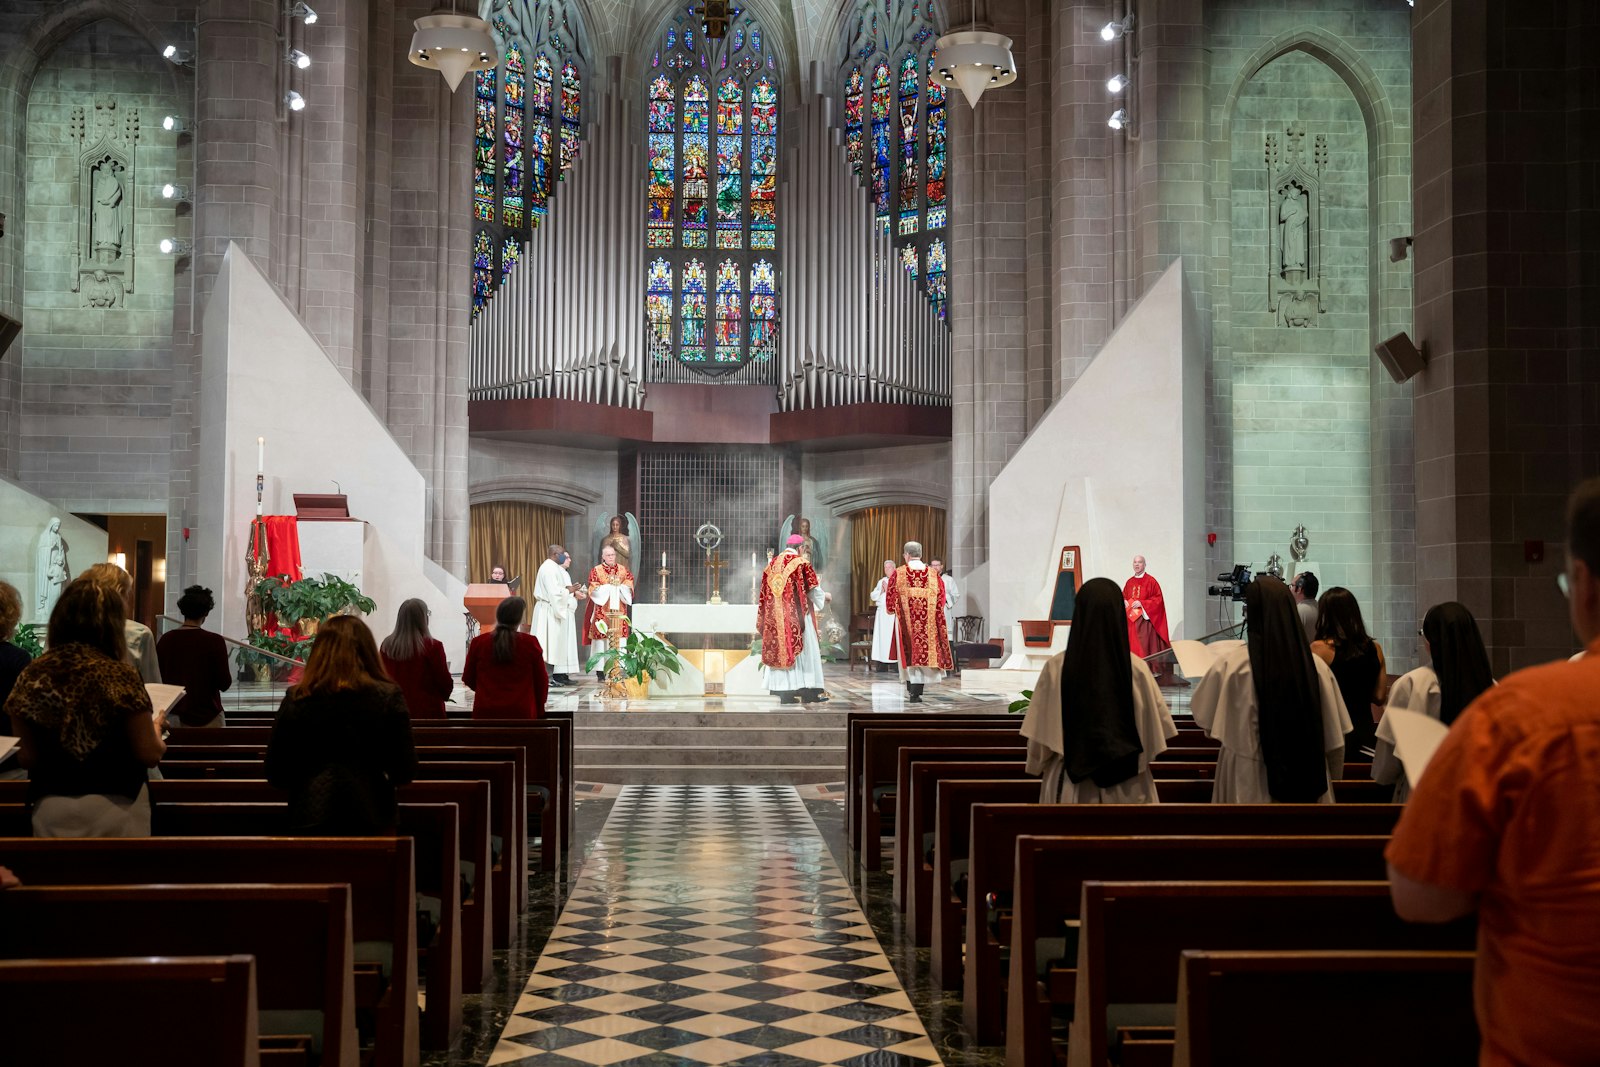 The Pentecost Vigil has served as a platform for the Archdiocese of Detroit to announce major initiatives in the Church since 2014, when Archbishop Vigneron called for a year of prayer for a new Pentecost. This year, the archbishop is asking the faithful to pray for priestly vocations and an increase in zeal for the Eucharist.